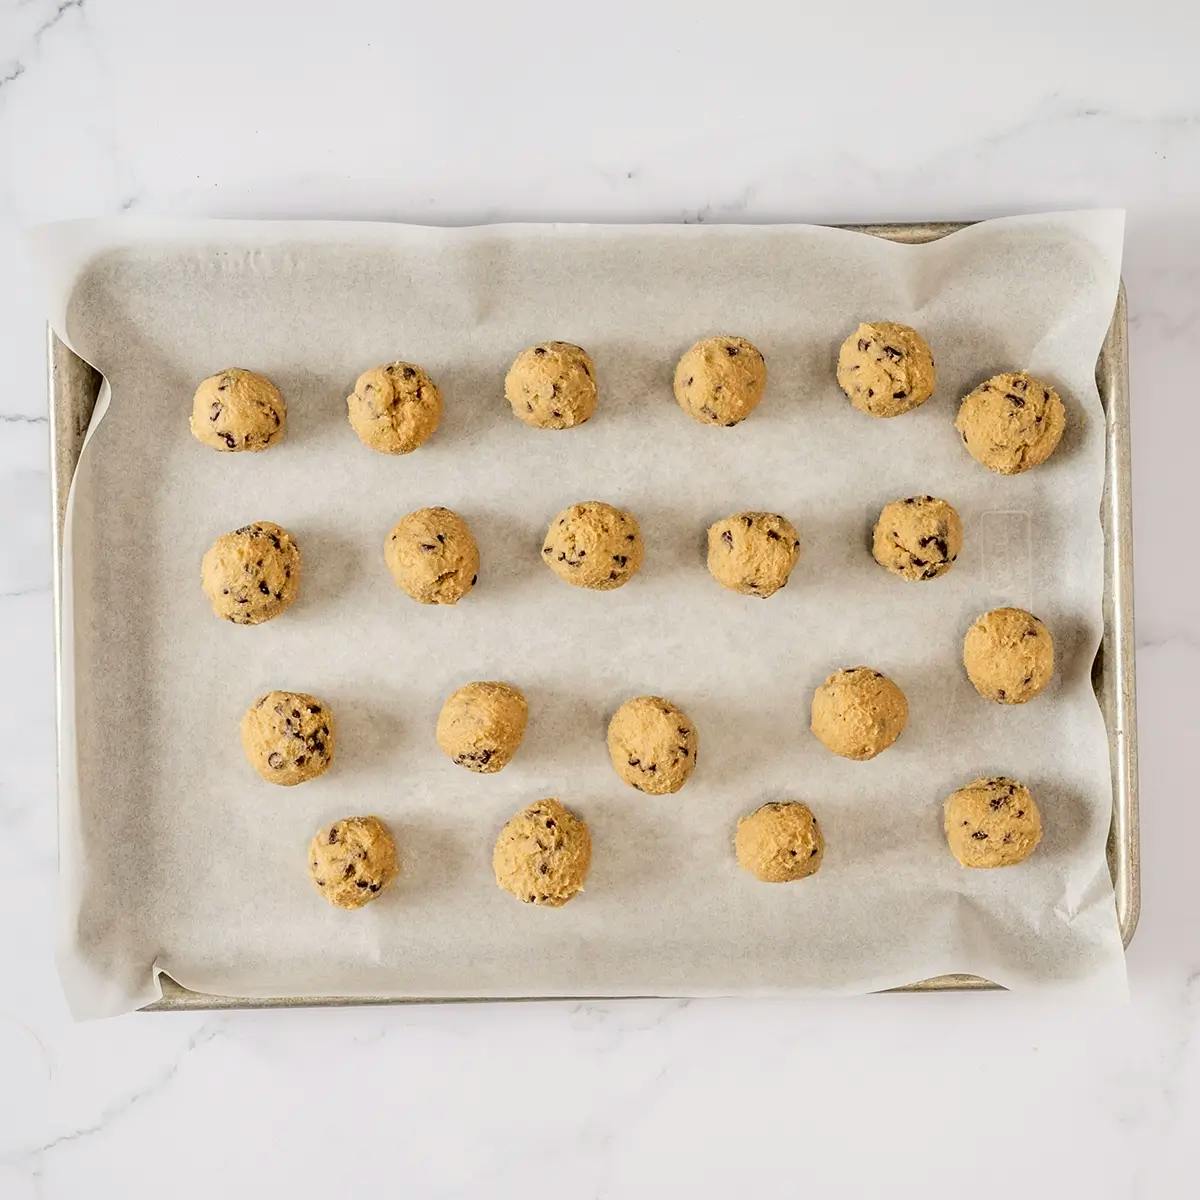 Cookie dough bites on a baking sheet ready to chill in the fridge.